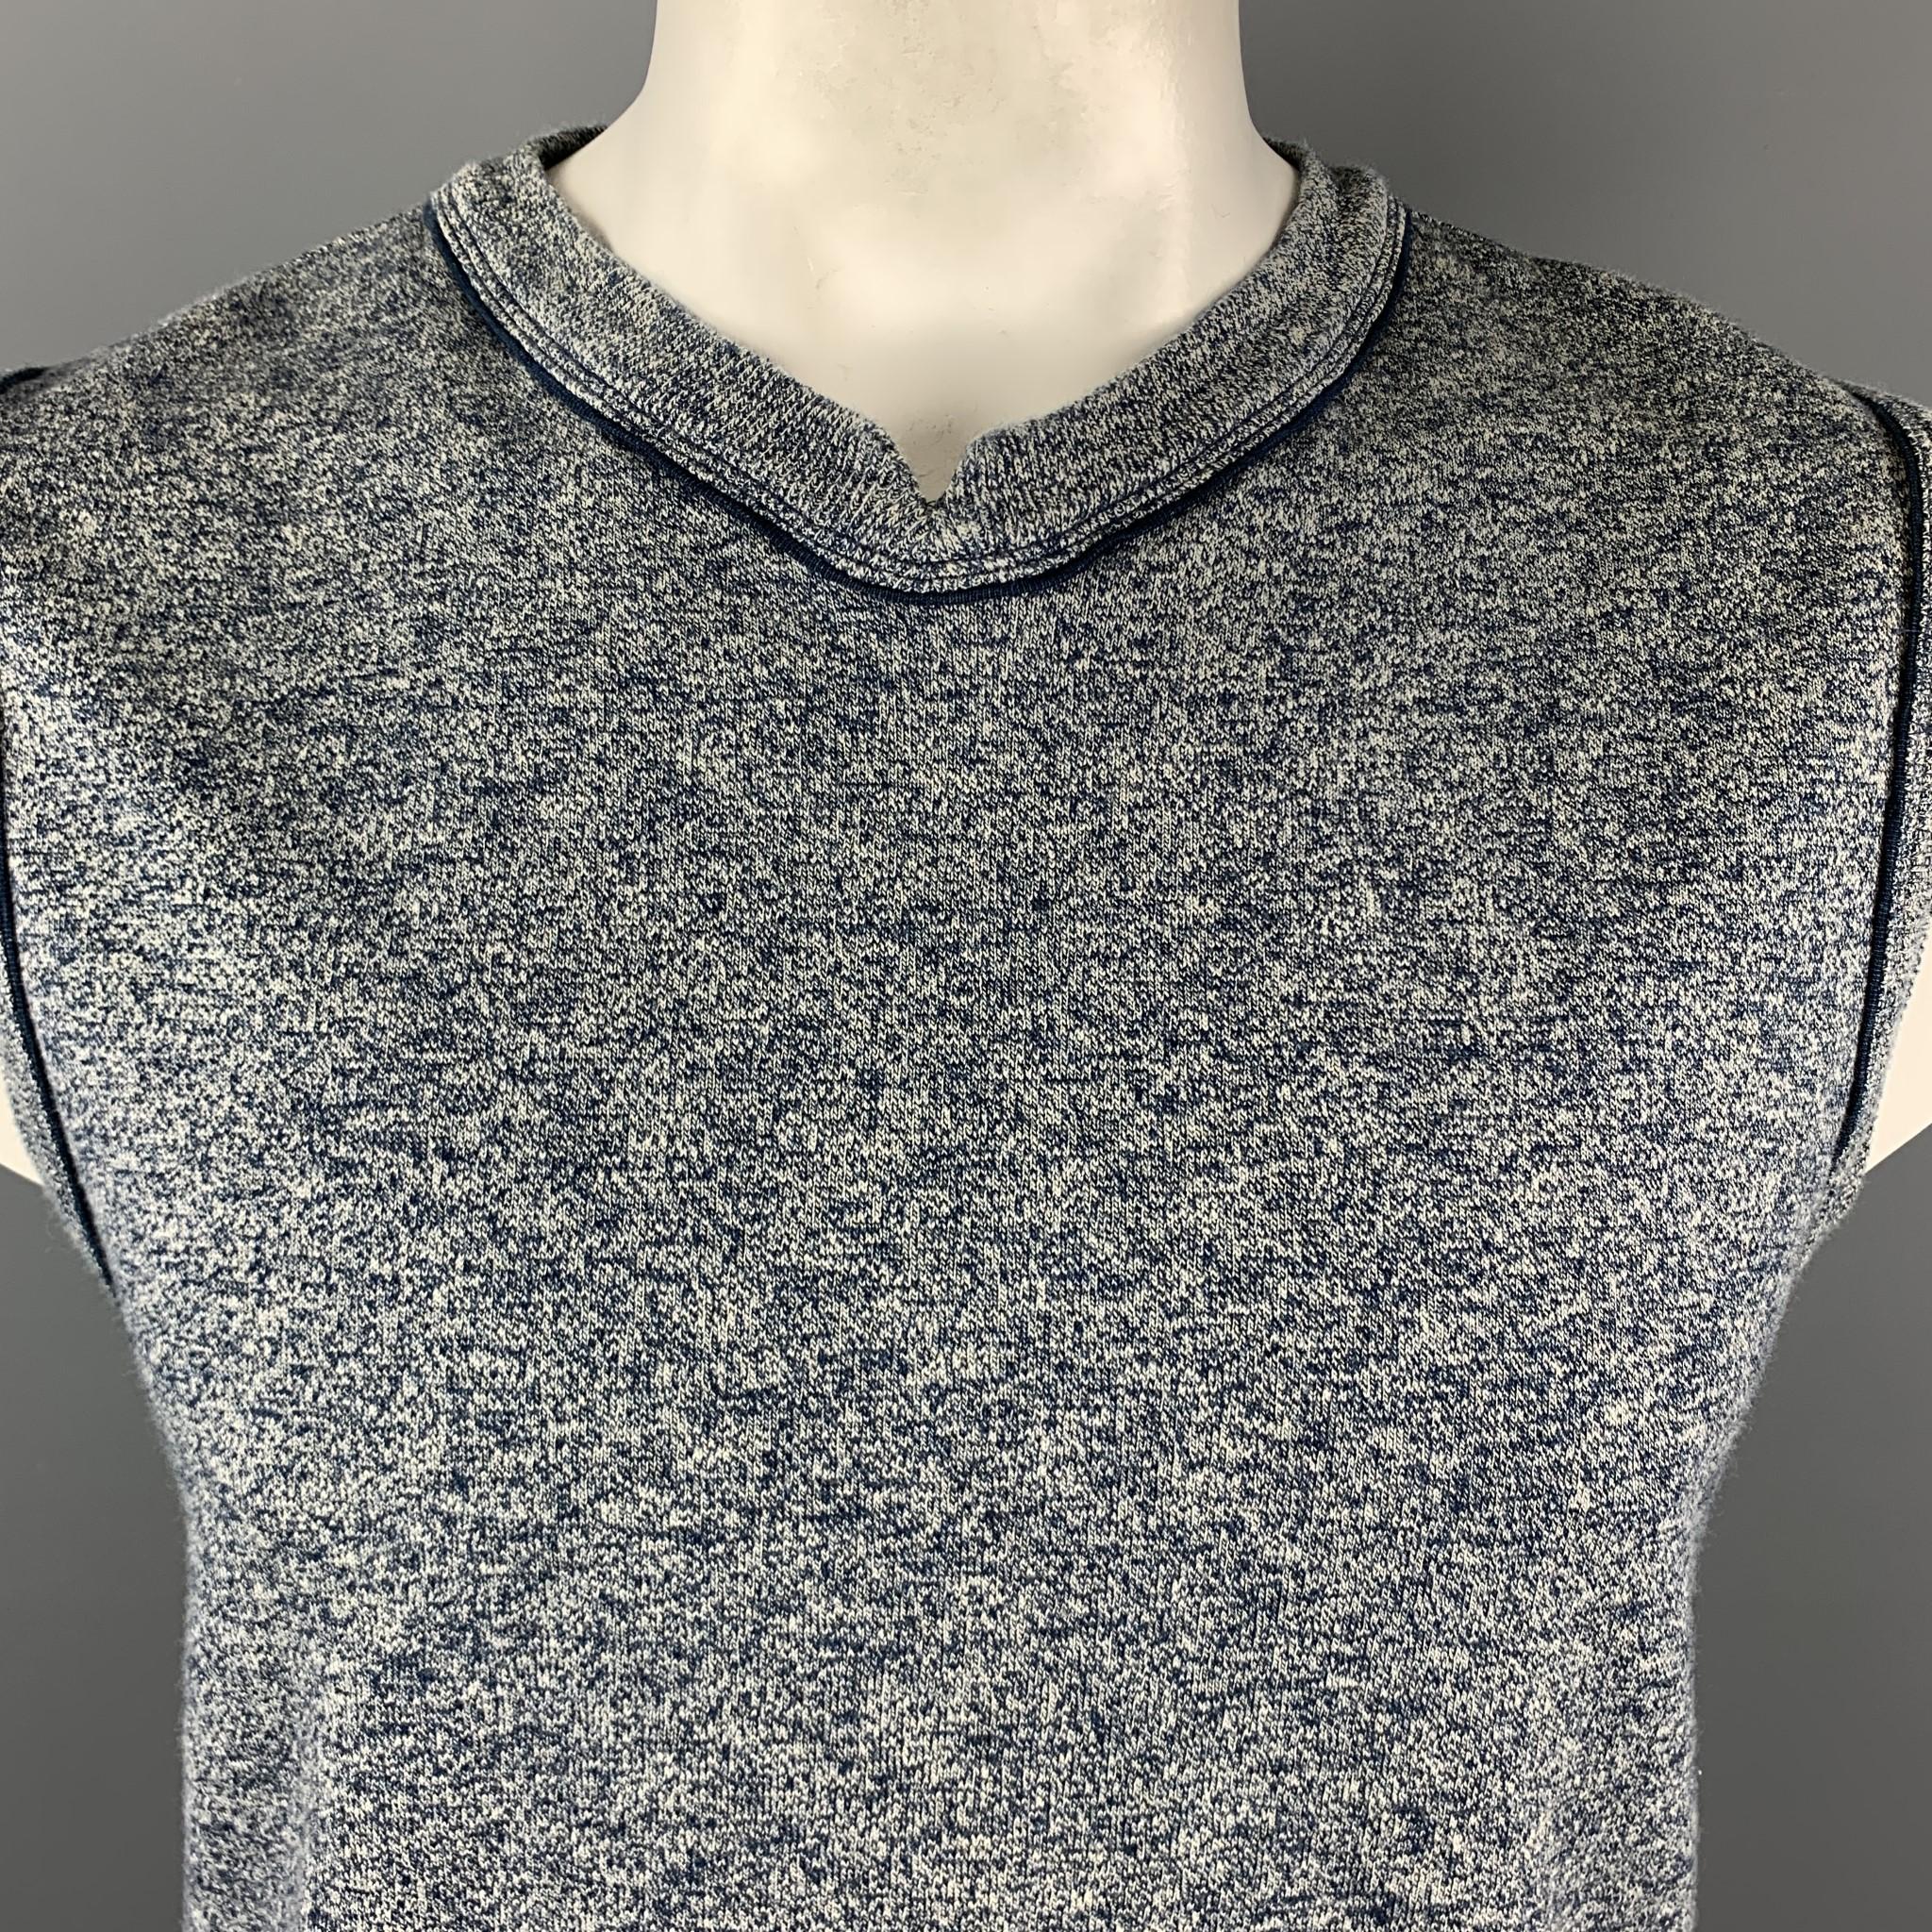 45RPM vest comes in gray and navy heathered cotton jersey knit with navy piping and a slit neckline detail. Made in Japan.

Excellent Pre-Owned Condition.
Marked: JP 5

Measurements:

Shoulder: 18 in.
Chest: 44 in.
Length: 27 in.
SKU: